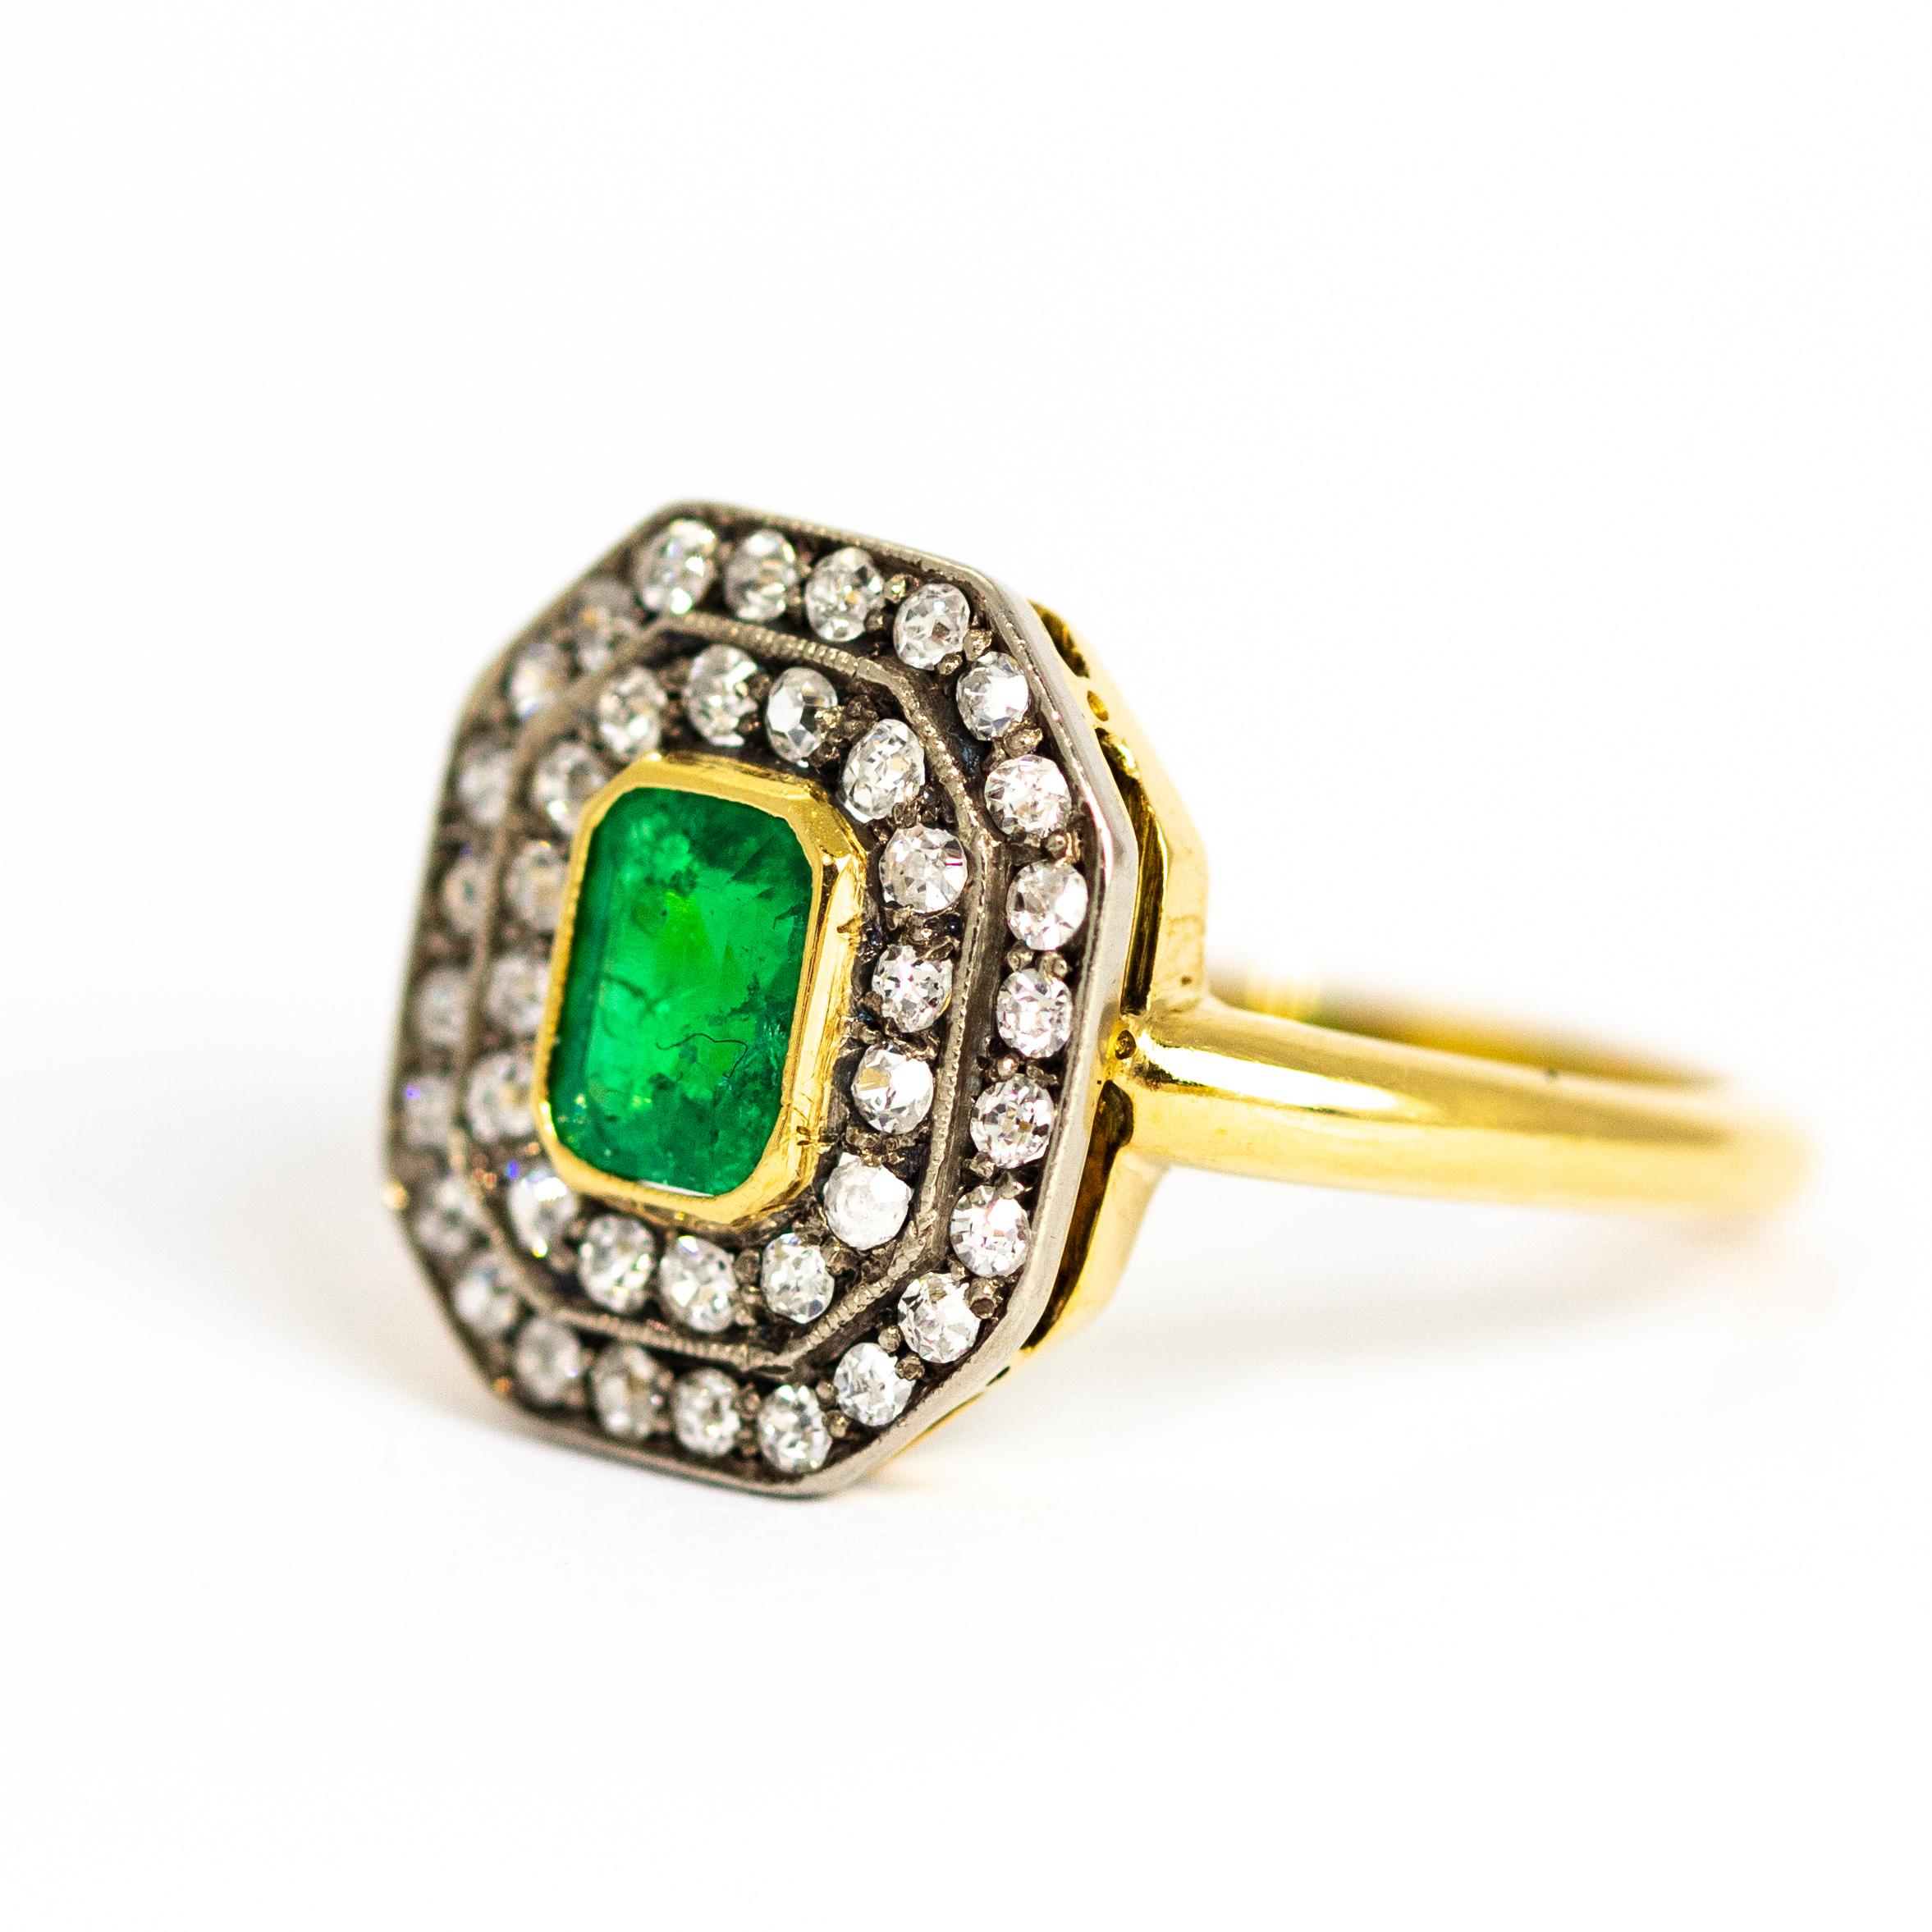 This stunning ring holds a wonderful bright emerald cut Emerald in the centre of two halos of sparkling old european cut Diamonds. The emerald is set in 18ct gold which makes the green really pop and the diamonds are set in platinum. 

Ring Size: R